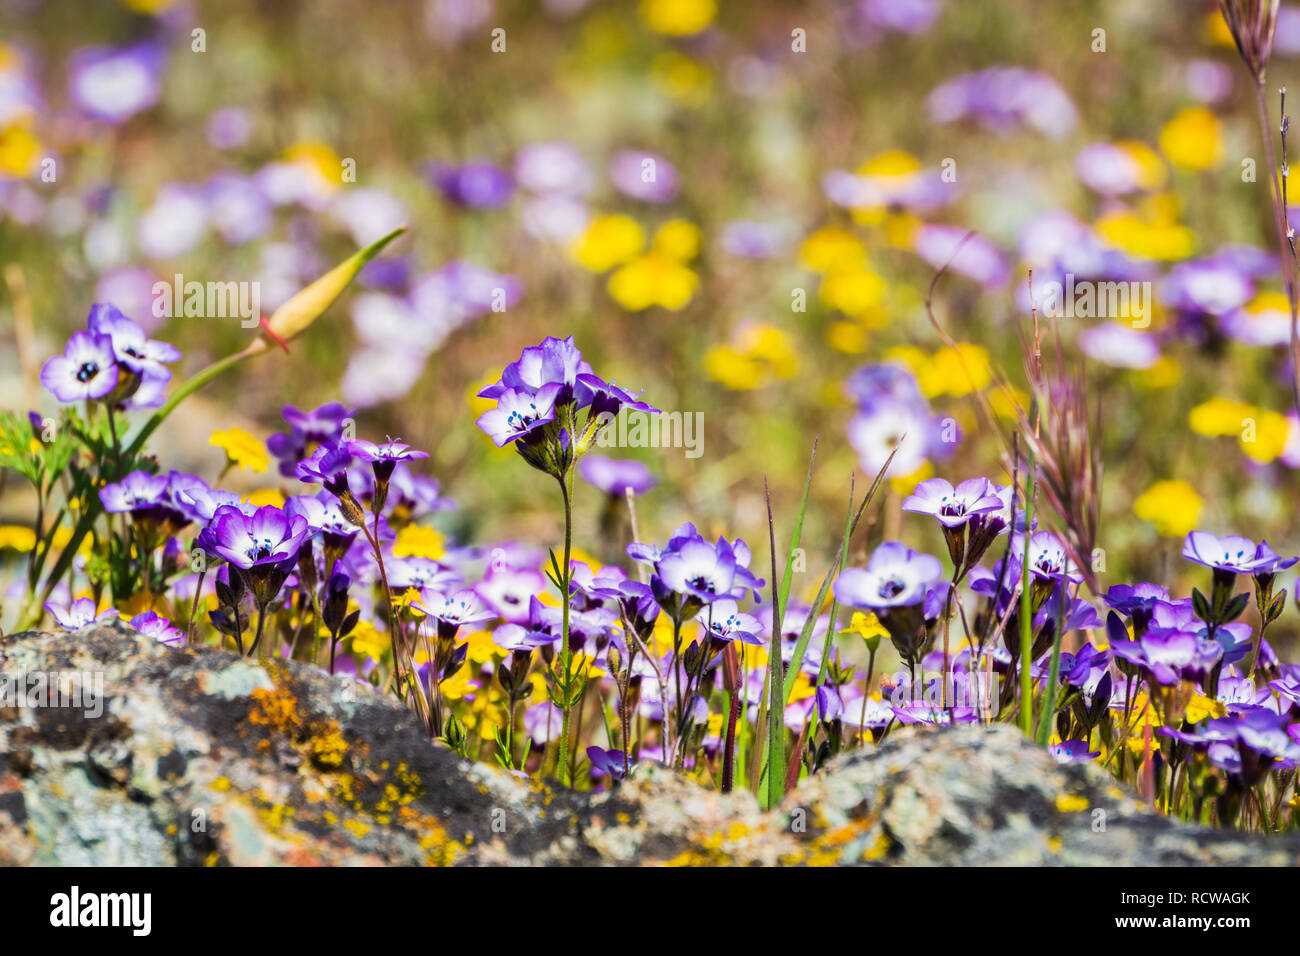 Gilia wildflowers blooming on a meadow, Henry W. Coe State Park, California Stock Photo